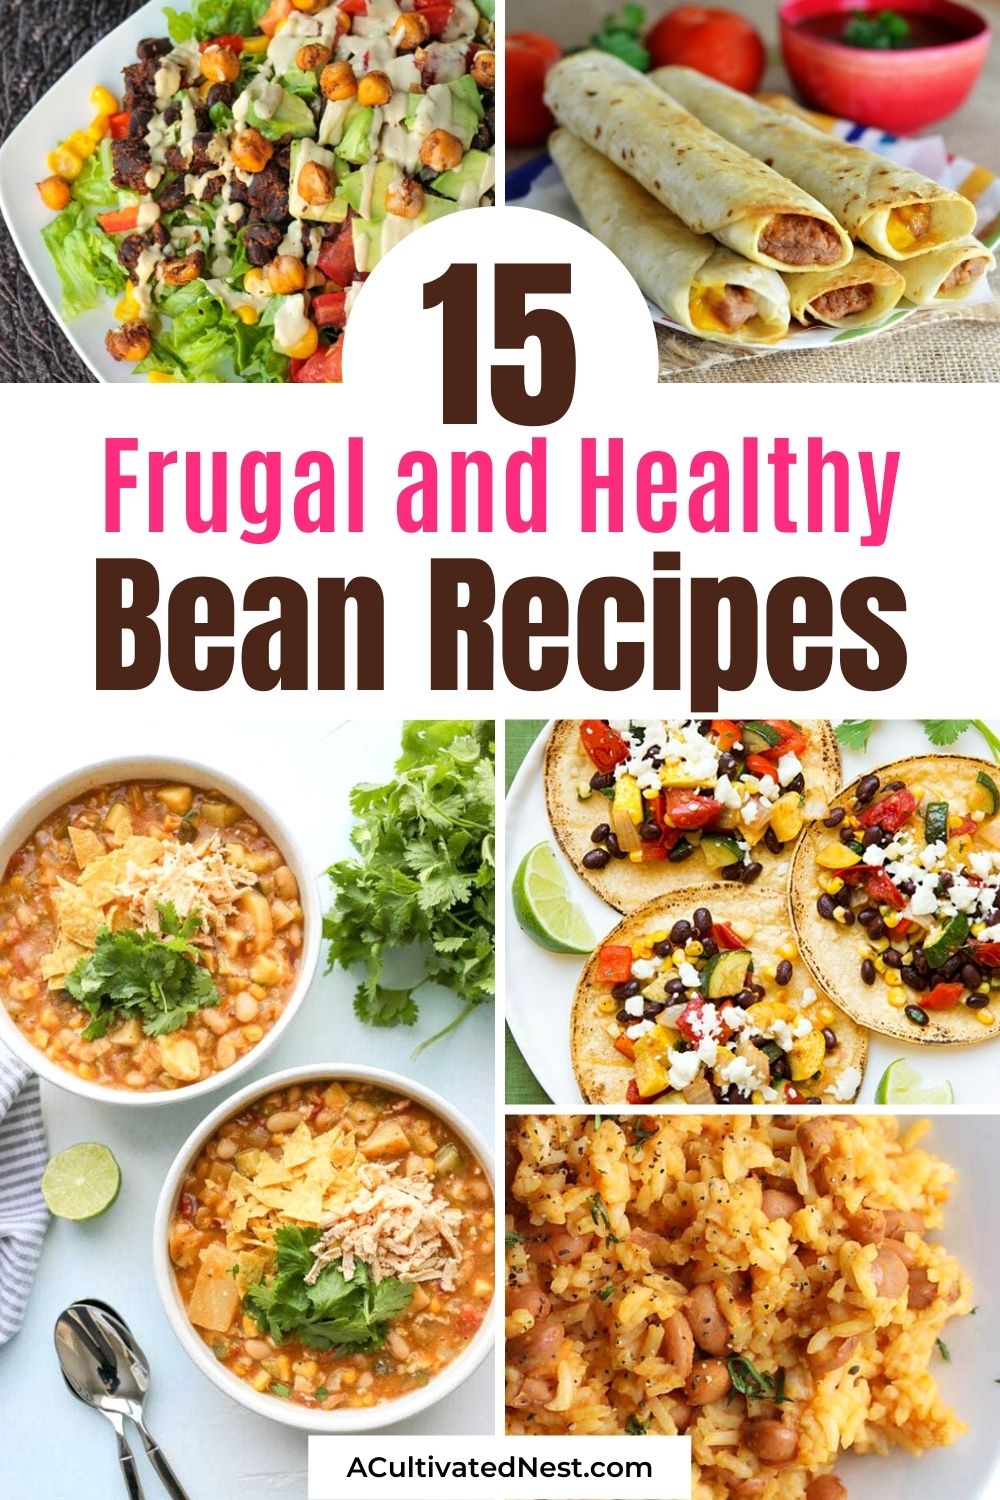 15 Delicious Bean Recipes- Whether you're trying to eat healthy or stick to your grocery budget, beans are a wonderful choice! Here are some delicious bean recipes your family (and your budget) will love! | #beanrecipes #recipes #frugalmeals #lowCalorieRecipes #ACultivatedNest